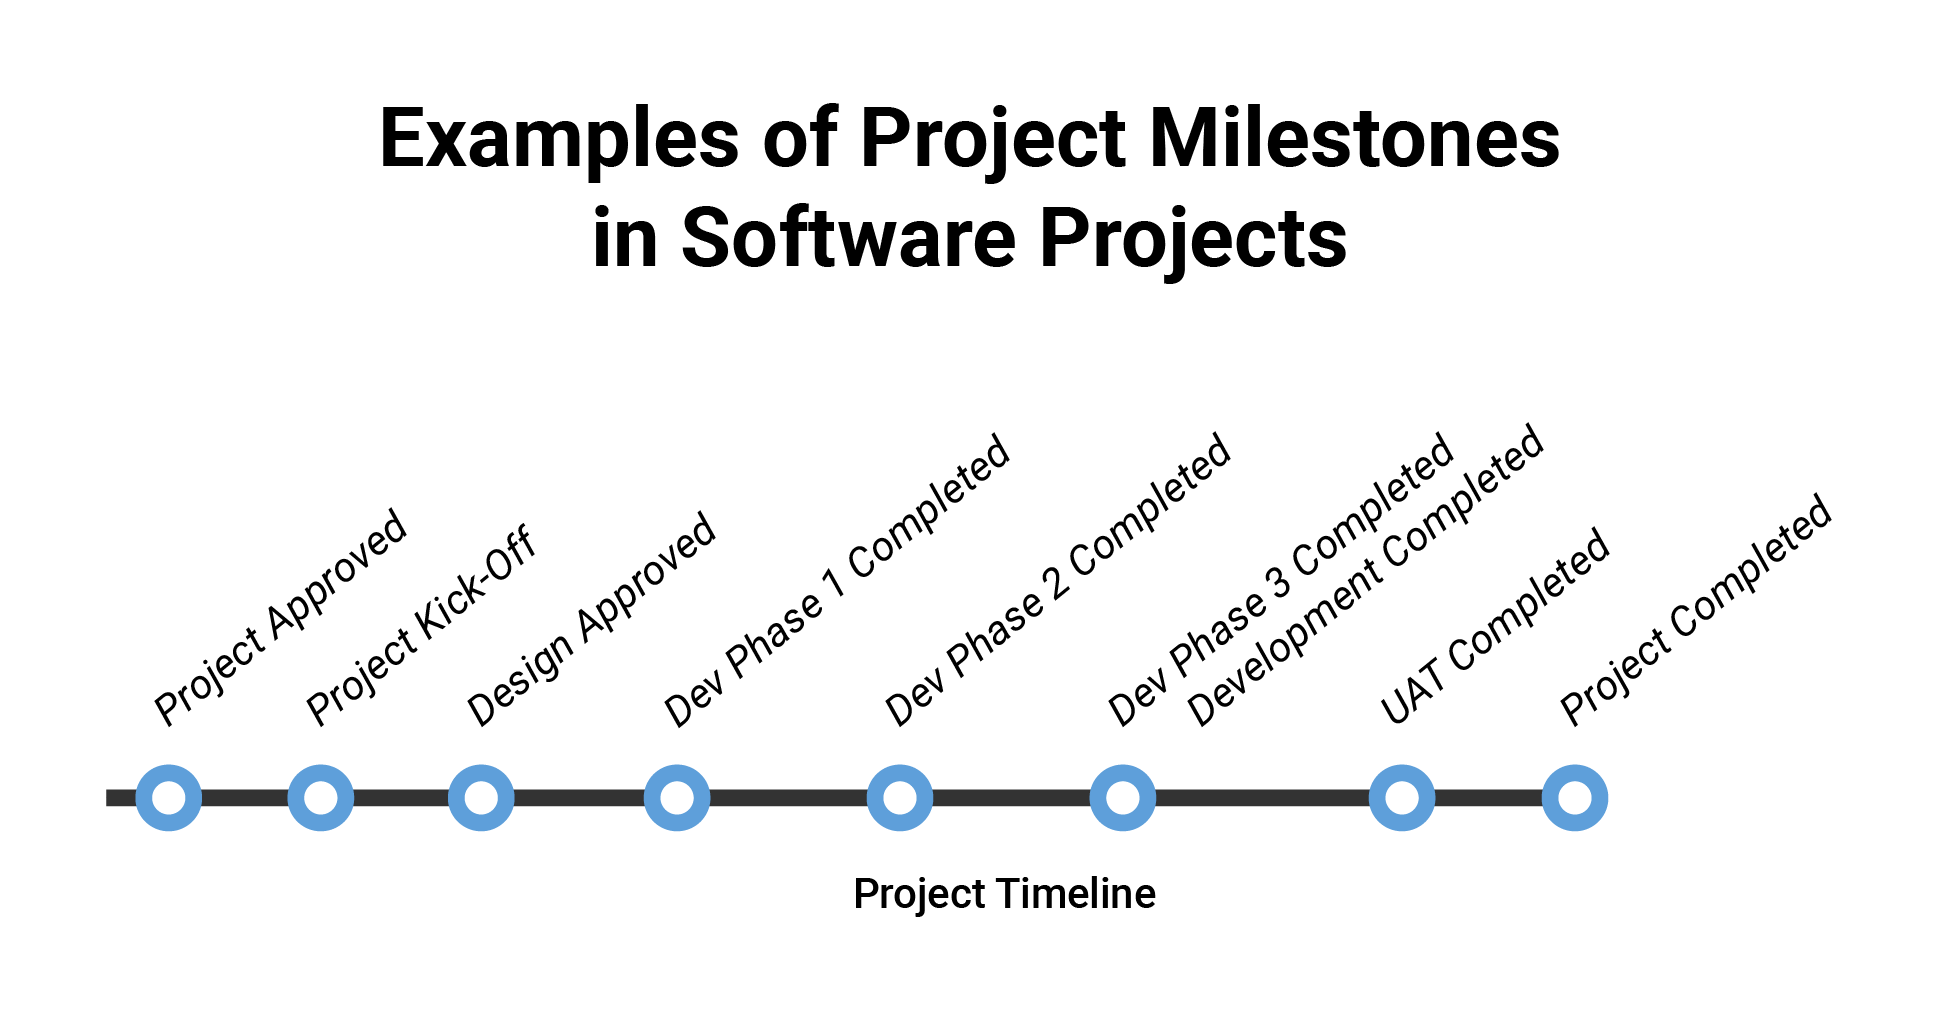 Learn to Make Game-Changing Project Milestones